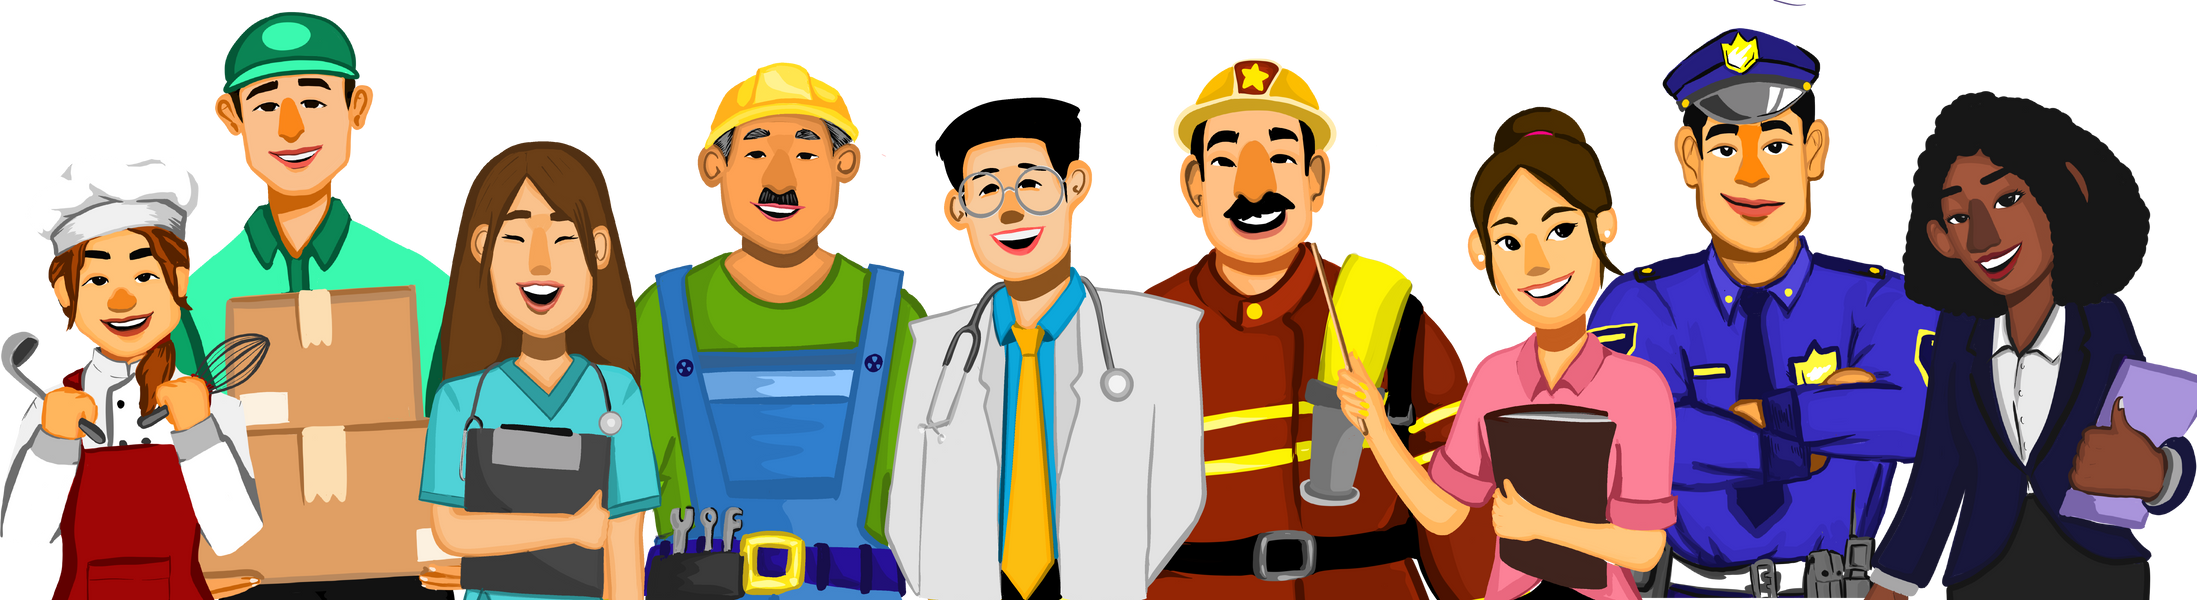 Smiling Workers Illustration